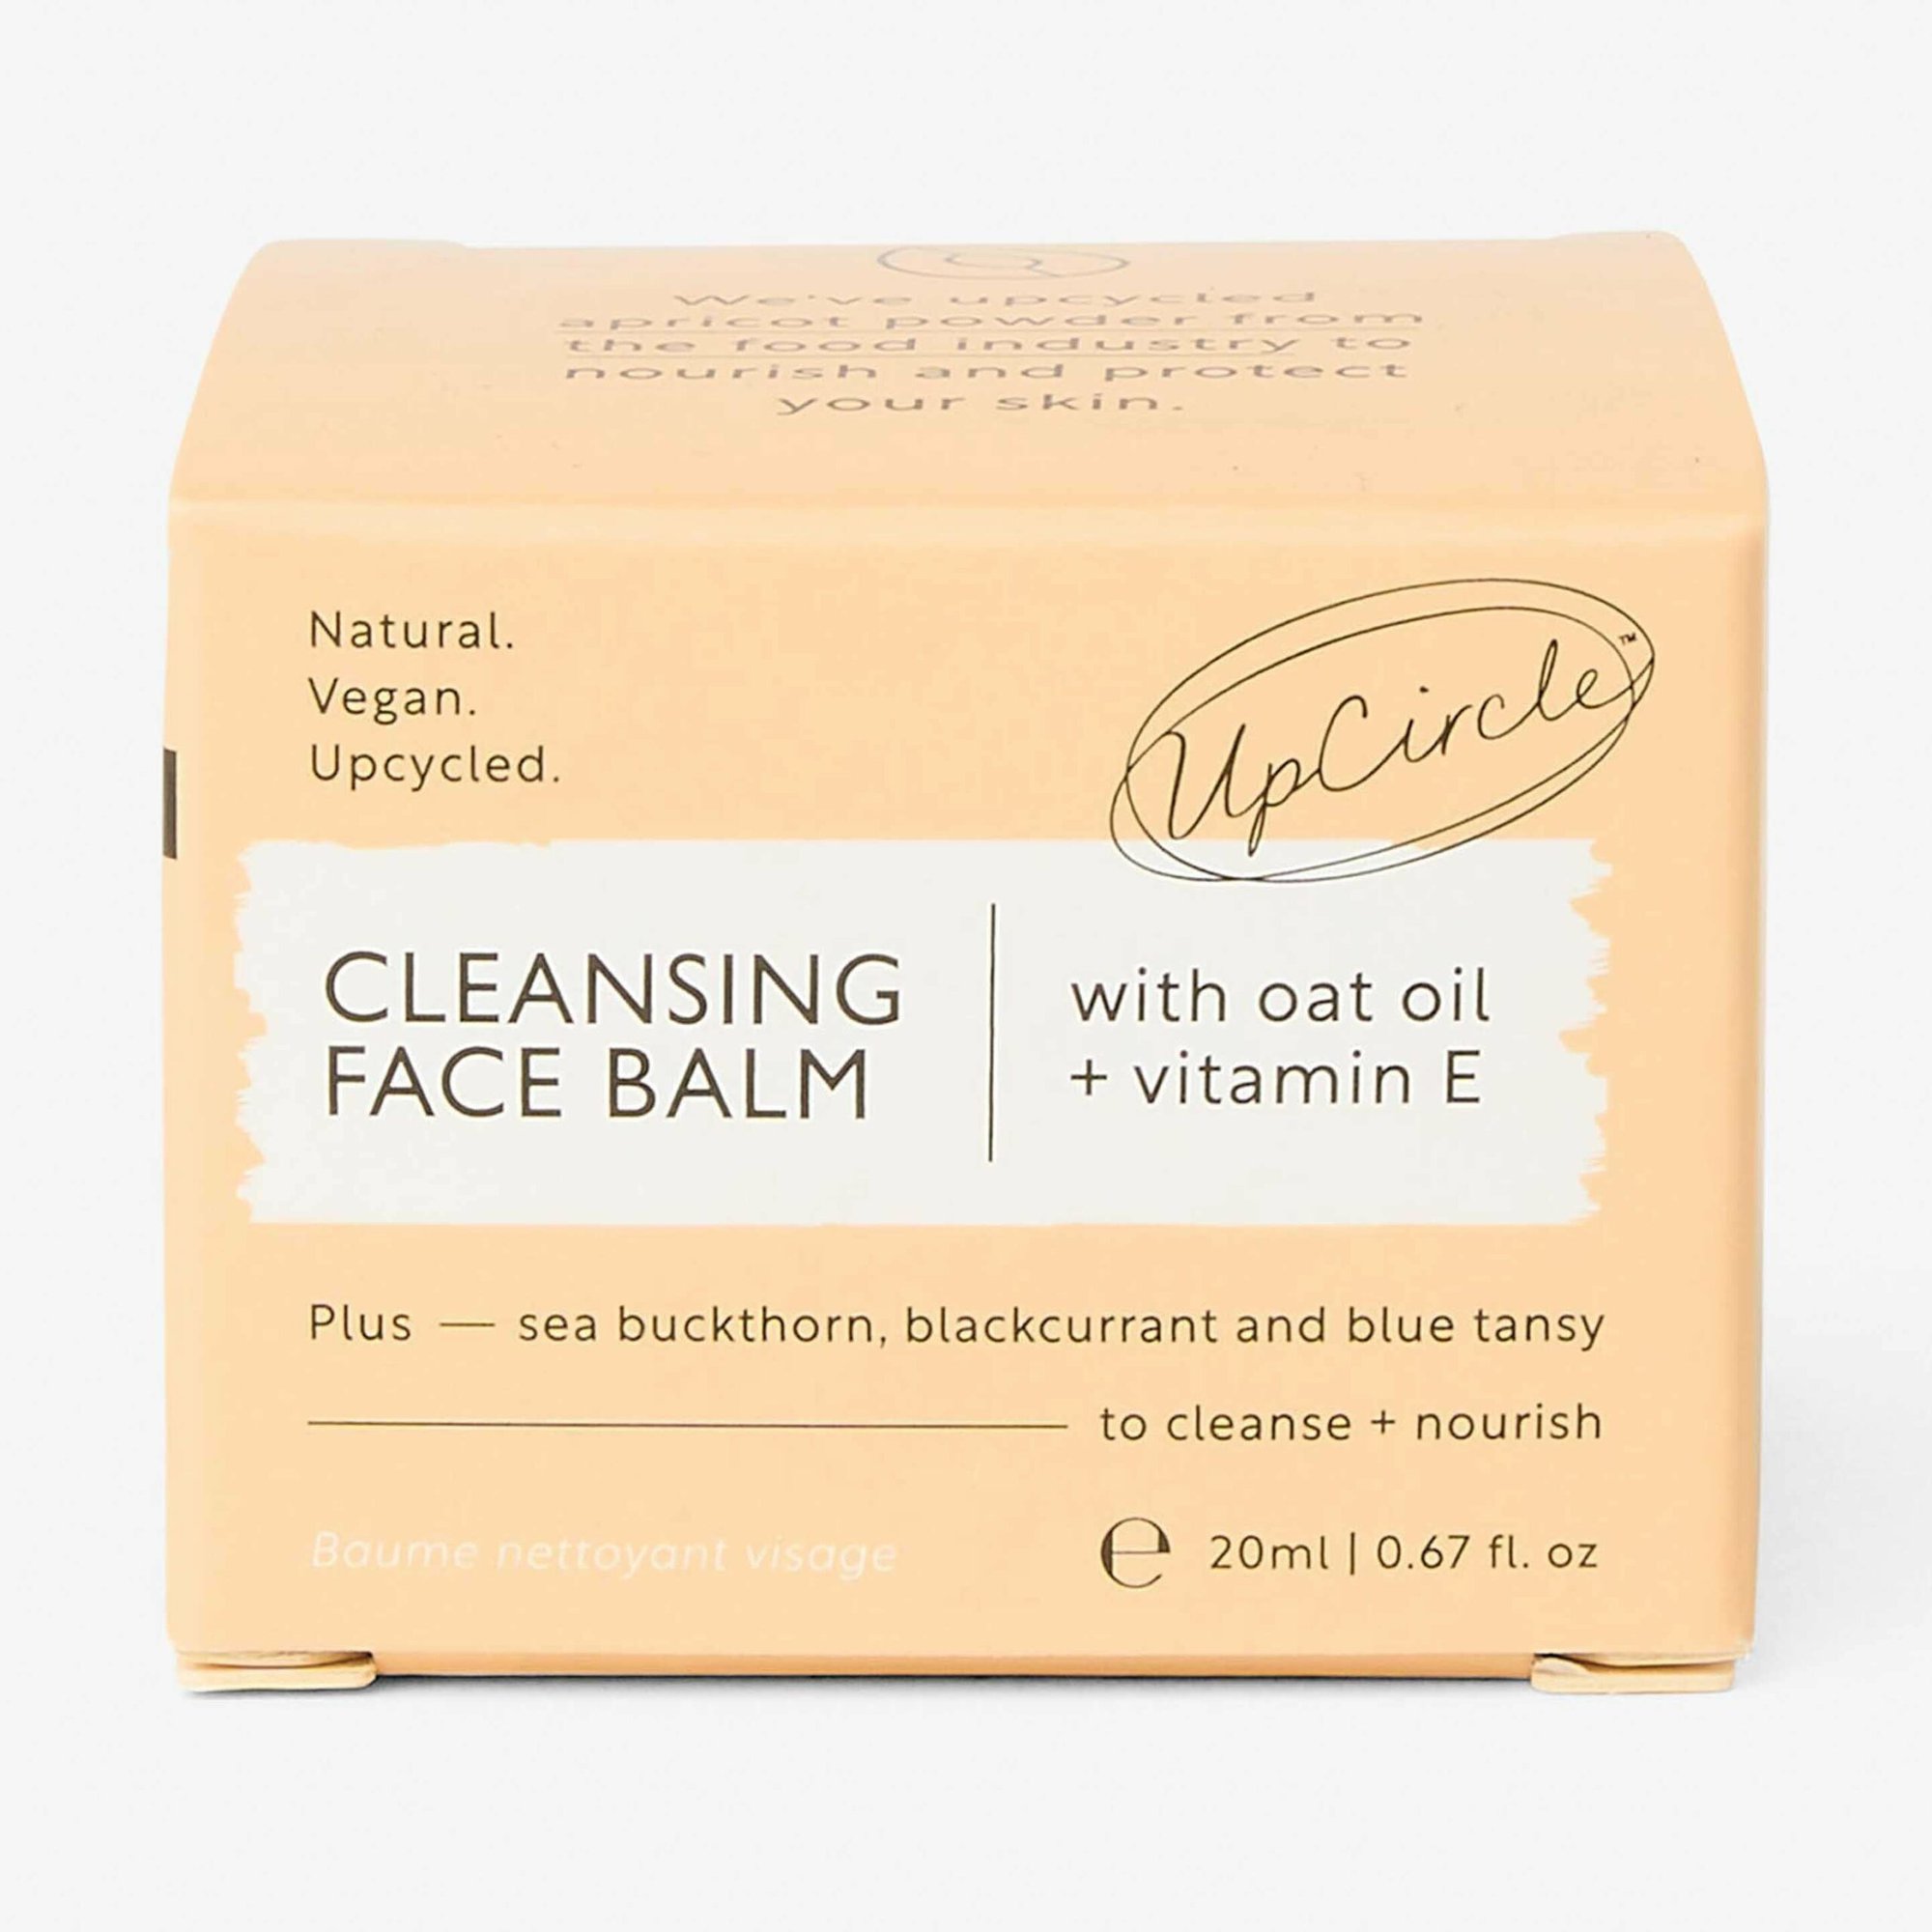 Cleansing Face Balm With Apricot Powder - Travel Size